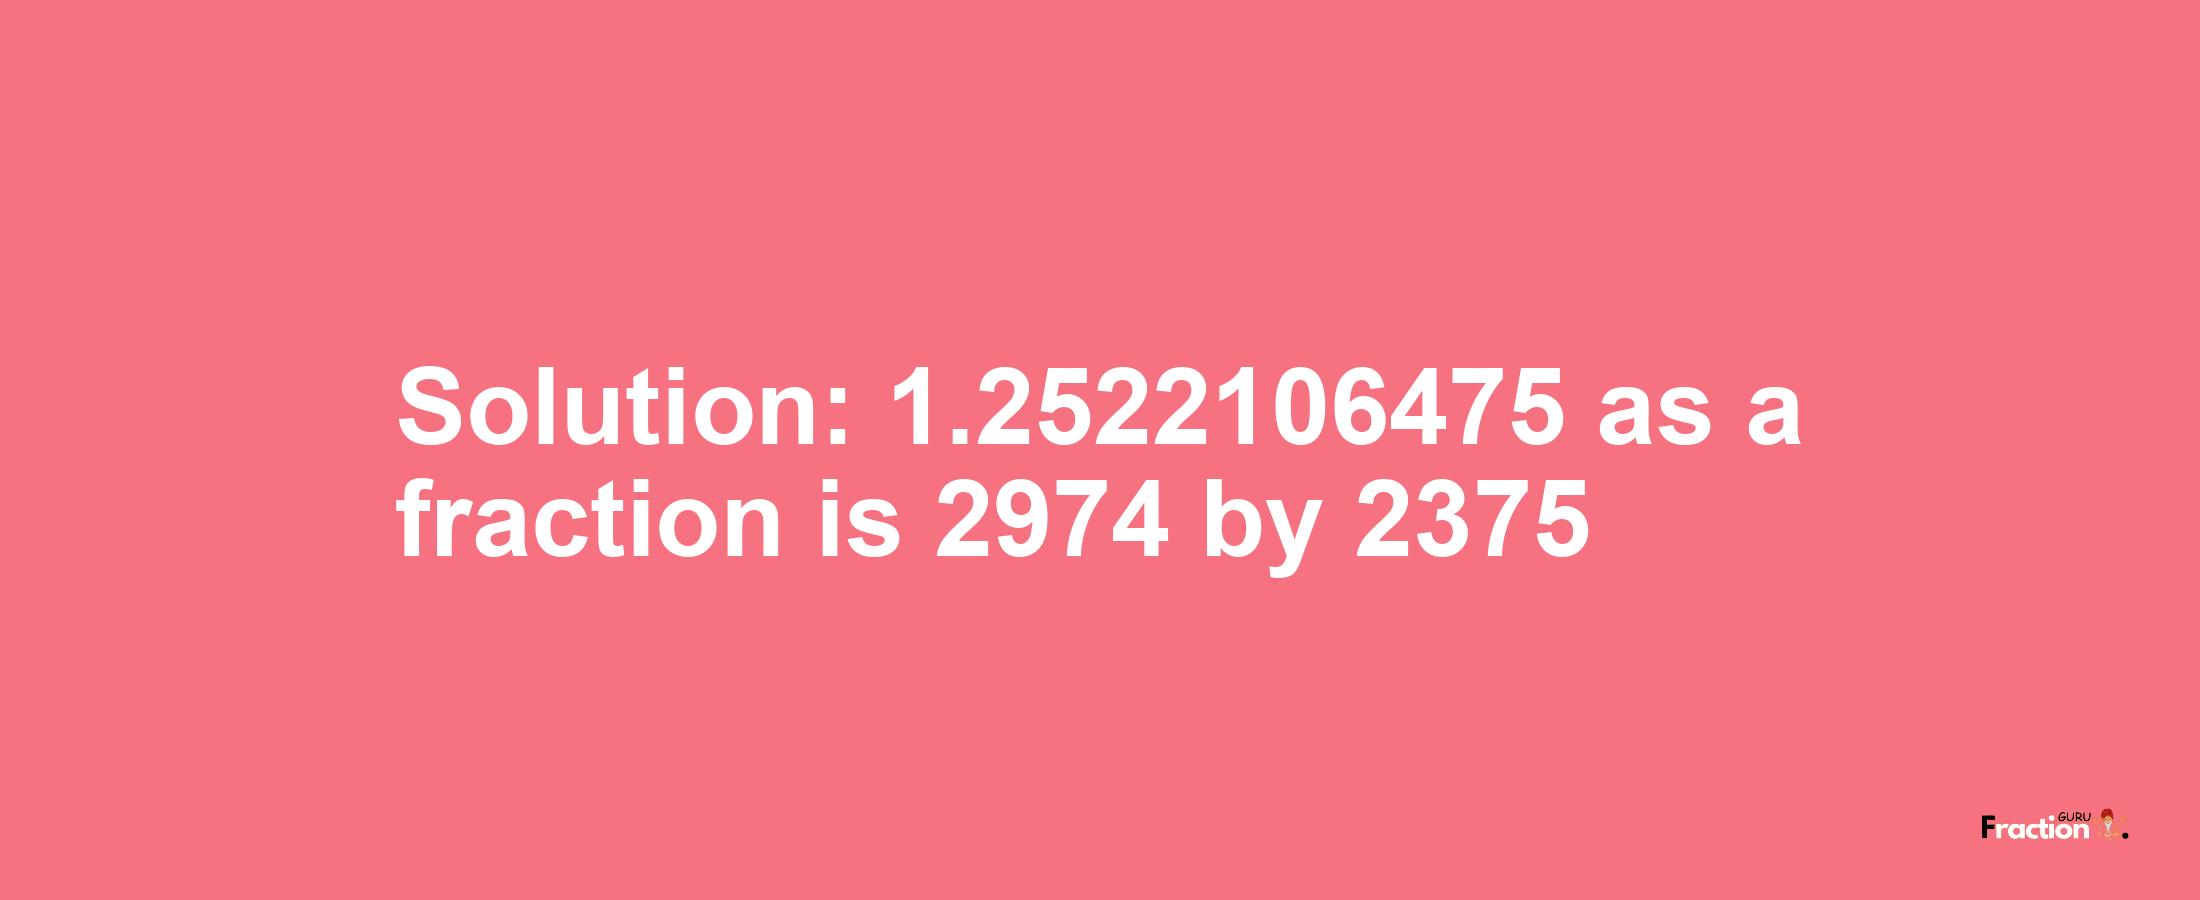 Solution:1.2522106475 as a fraction is 2974/2375